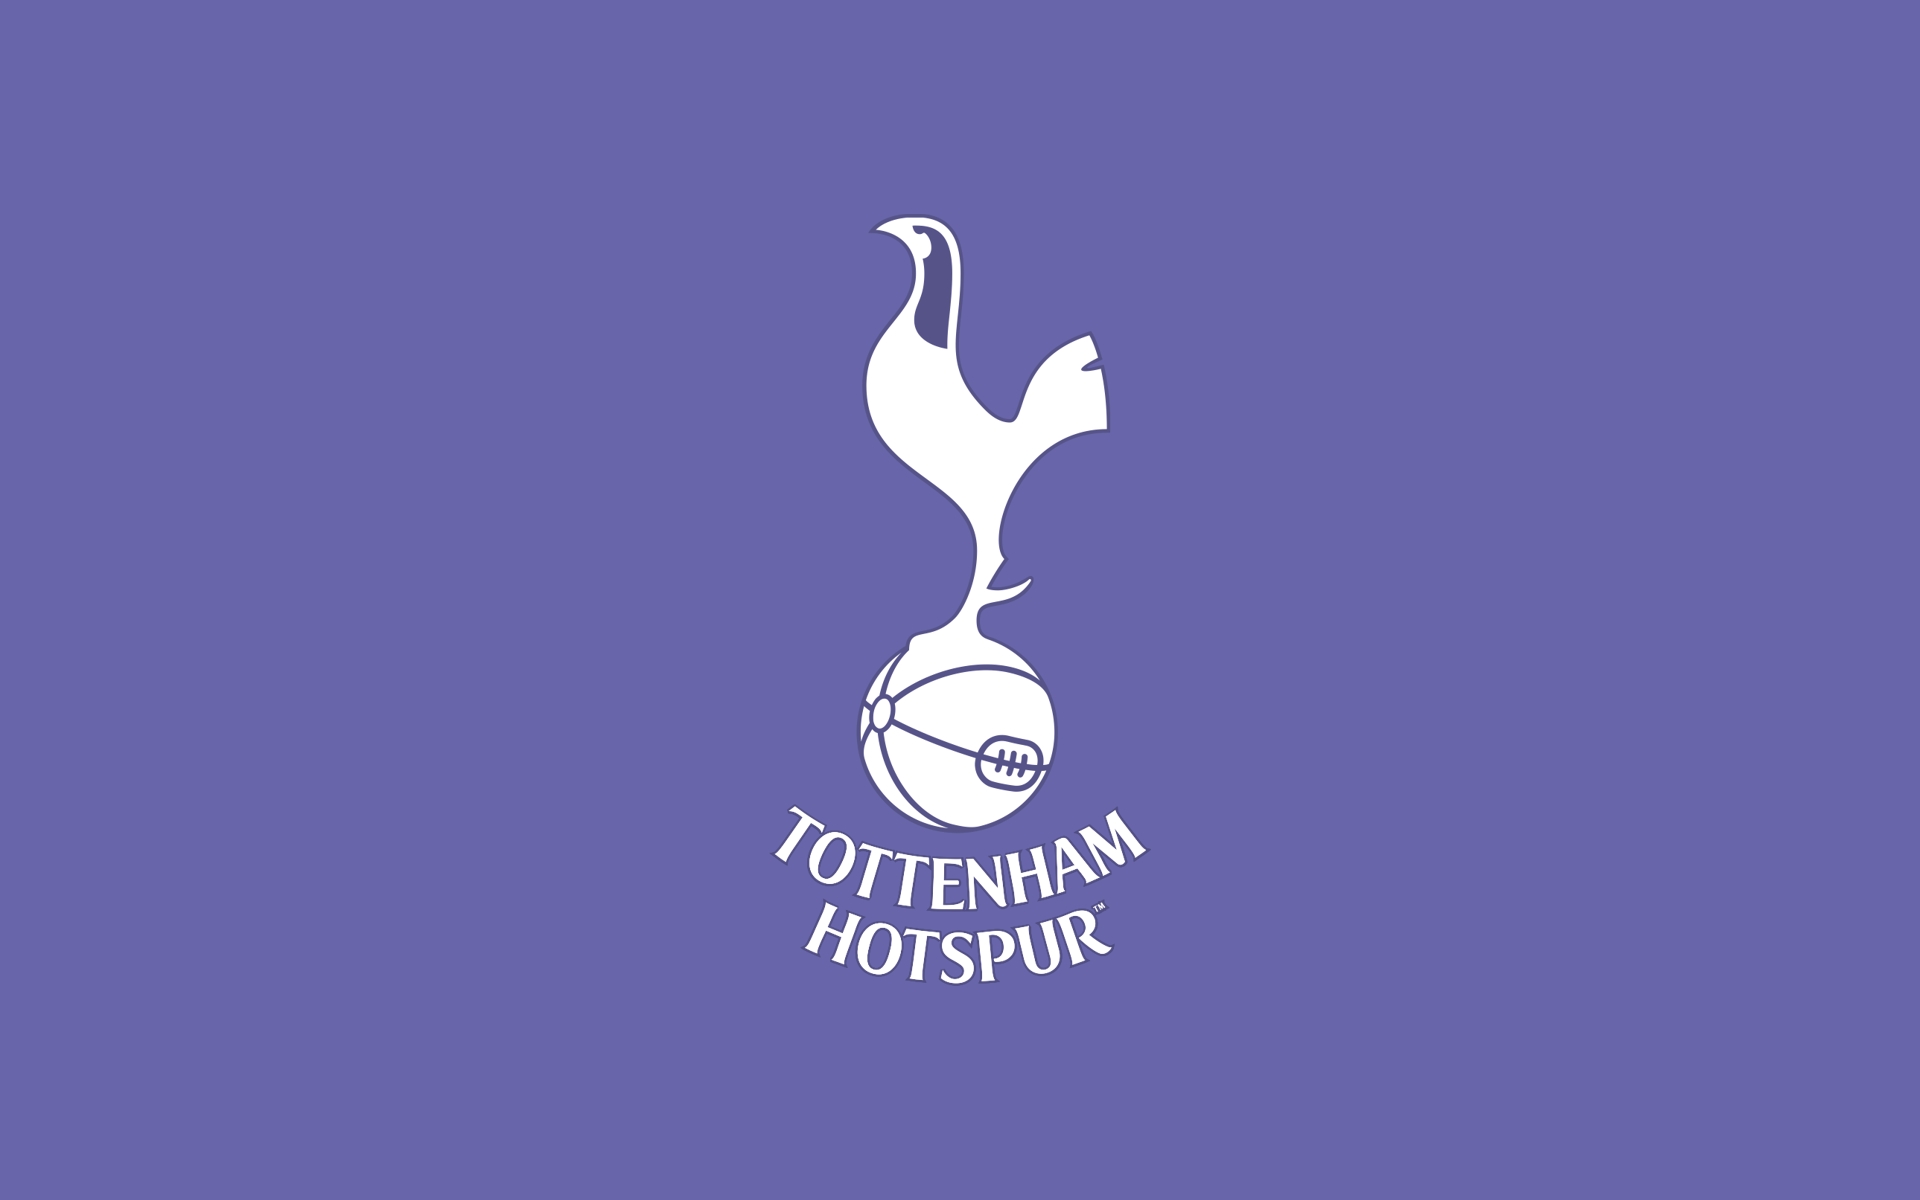 Tottenham Hotspurs Wallpaper Android Phone With